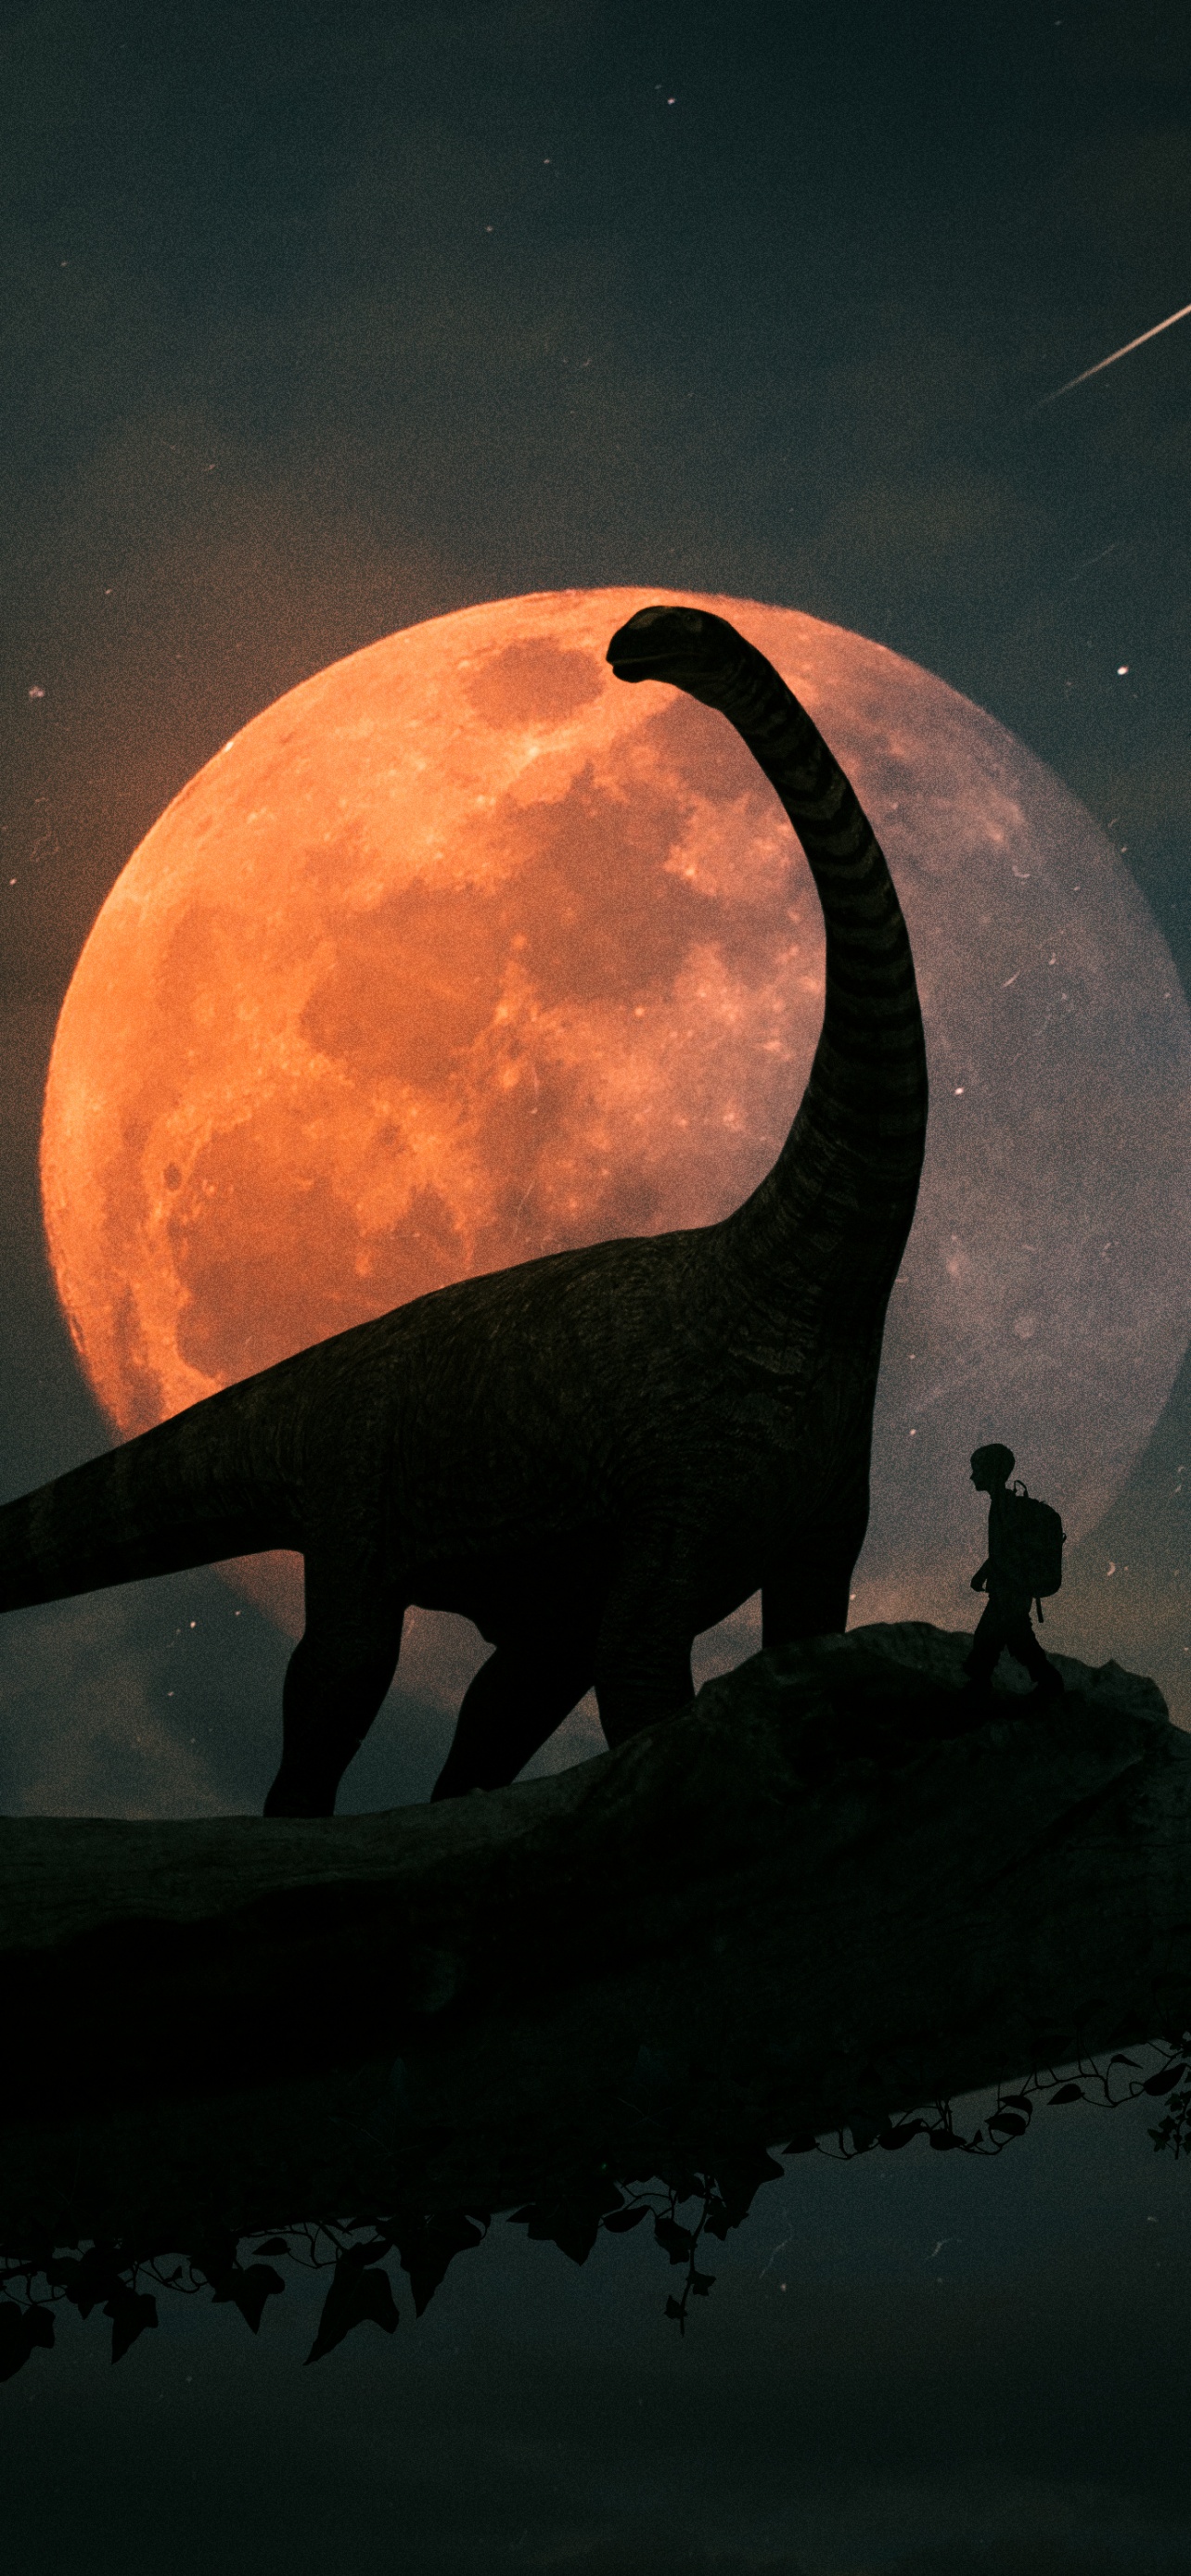 The Good Dinosaur Downloadable Wallpaper for iOS  Android Phones  For  The Love of Pixar